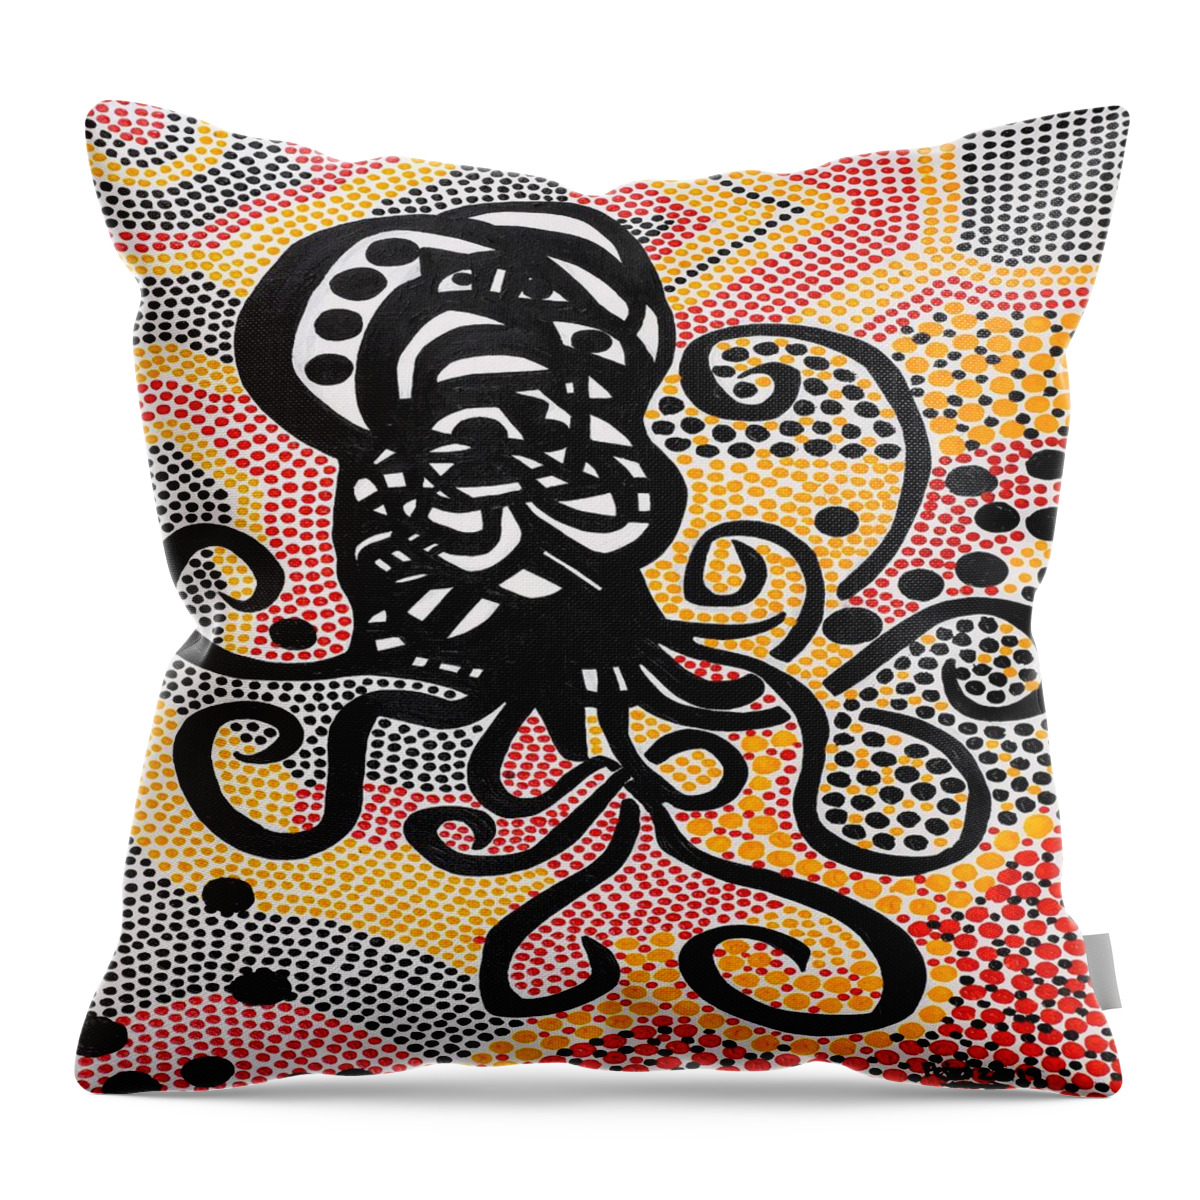 Octopus Throw Pillow featuring the mixed media Octavia by Peter Johnstone